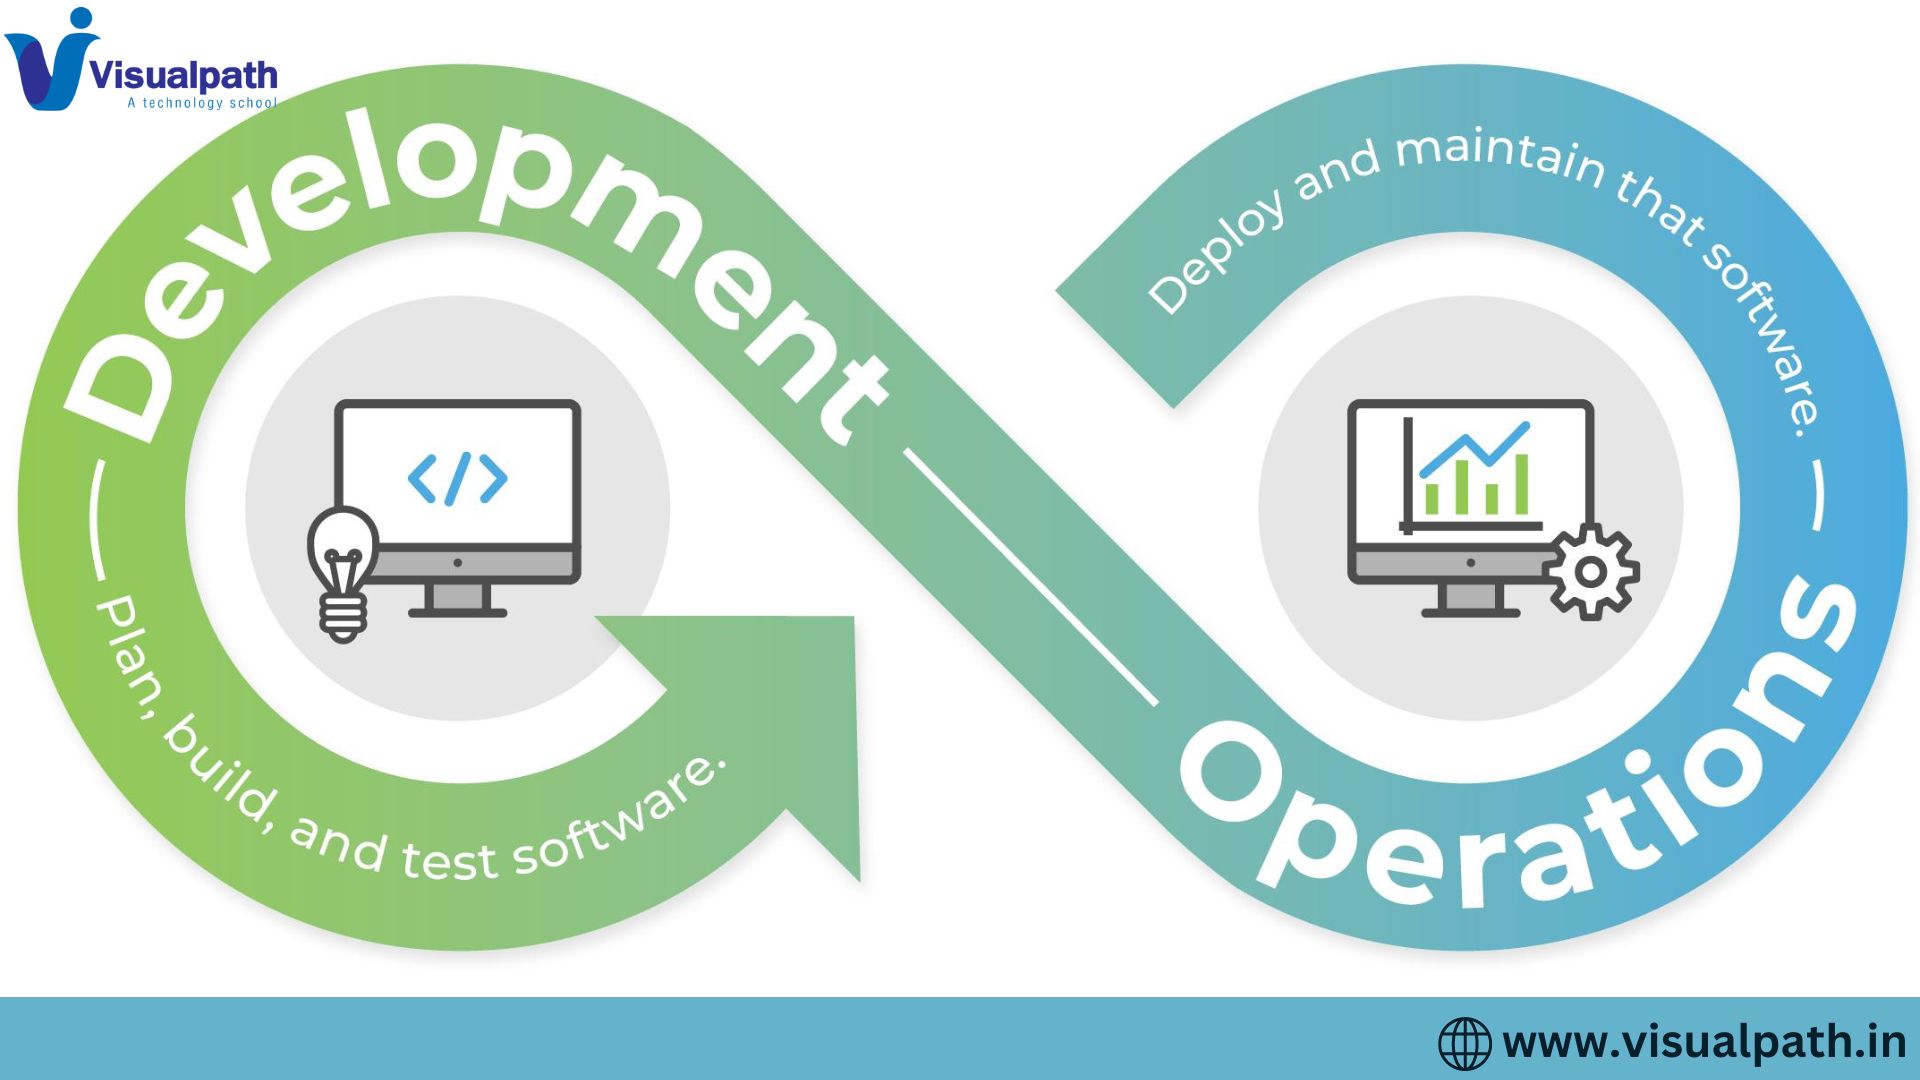 DevOps: How Developers and Operations Work Together